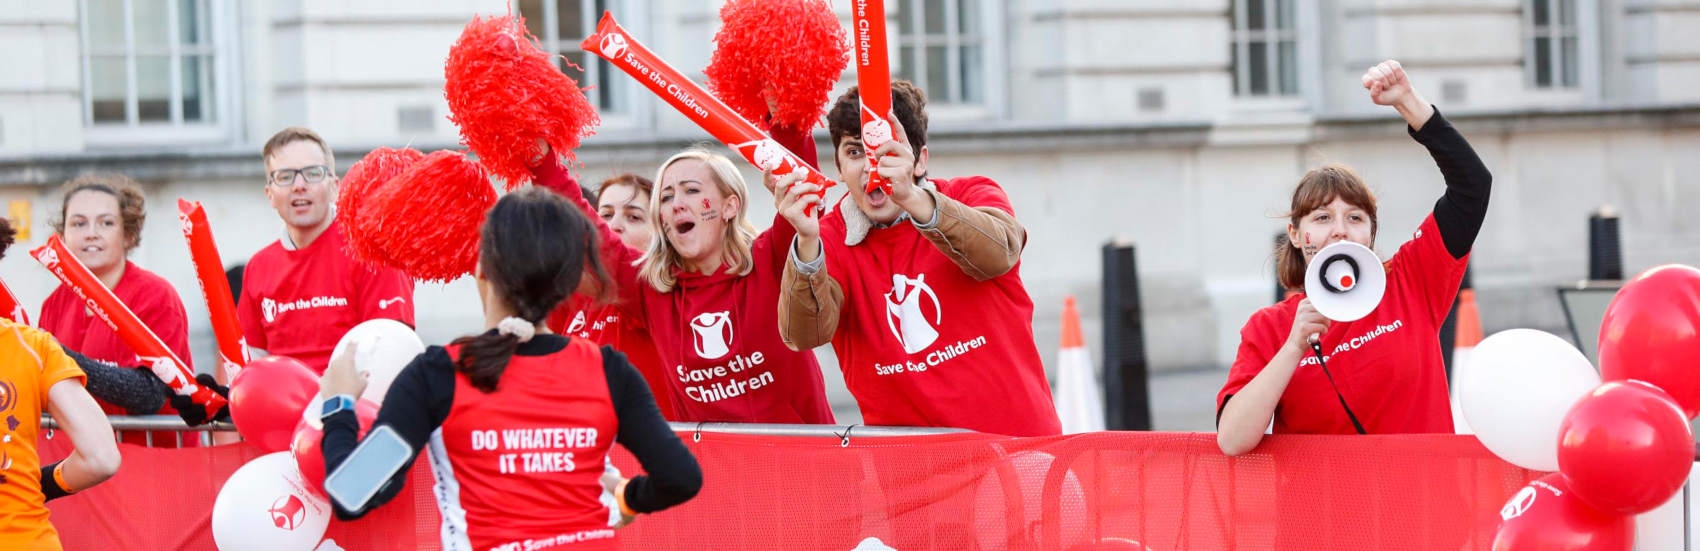 Volunteers do Whatever it Takes to Save Children, running for Save the Children in the Royal Parks Half Marathon